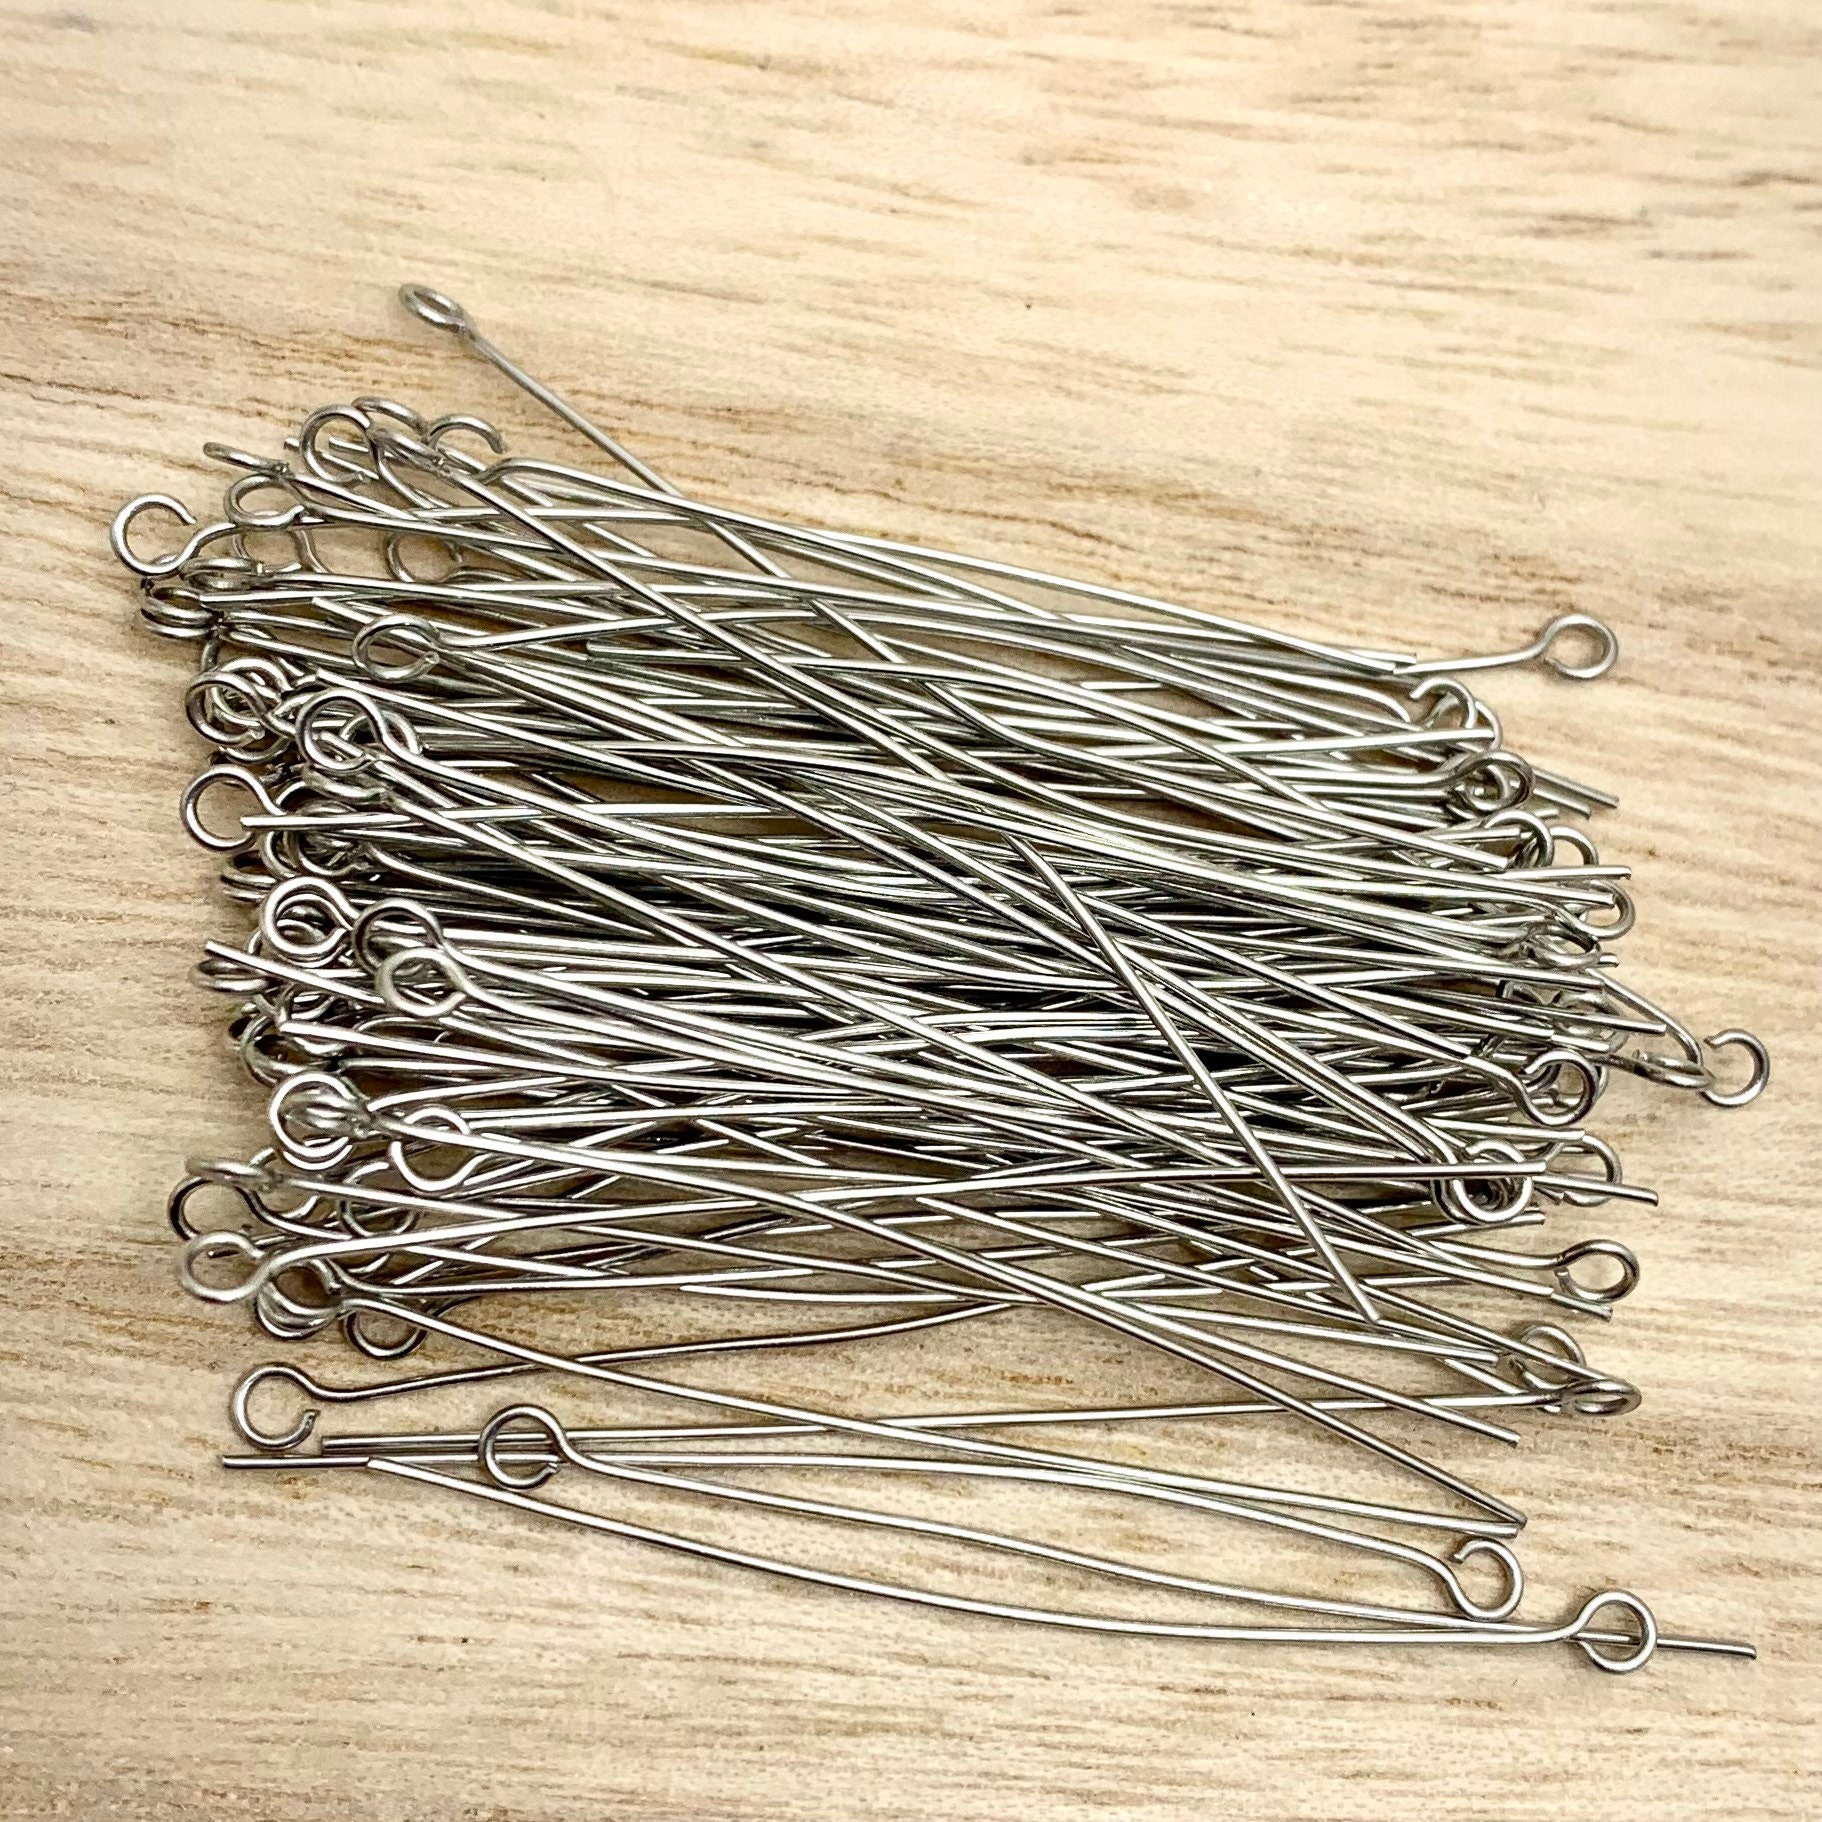 100 15/20/25/30/40/50mm Eye Pins Stainless Steel Eyepins Gold Silver Tone  22 Gauge for Jewelry Making, Bulk Wholesale Beading Findings 